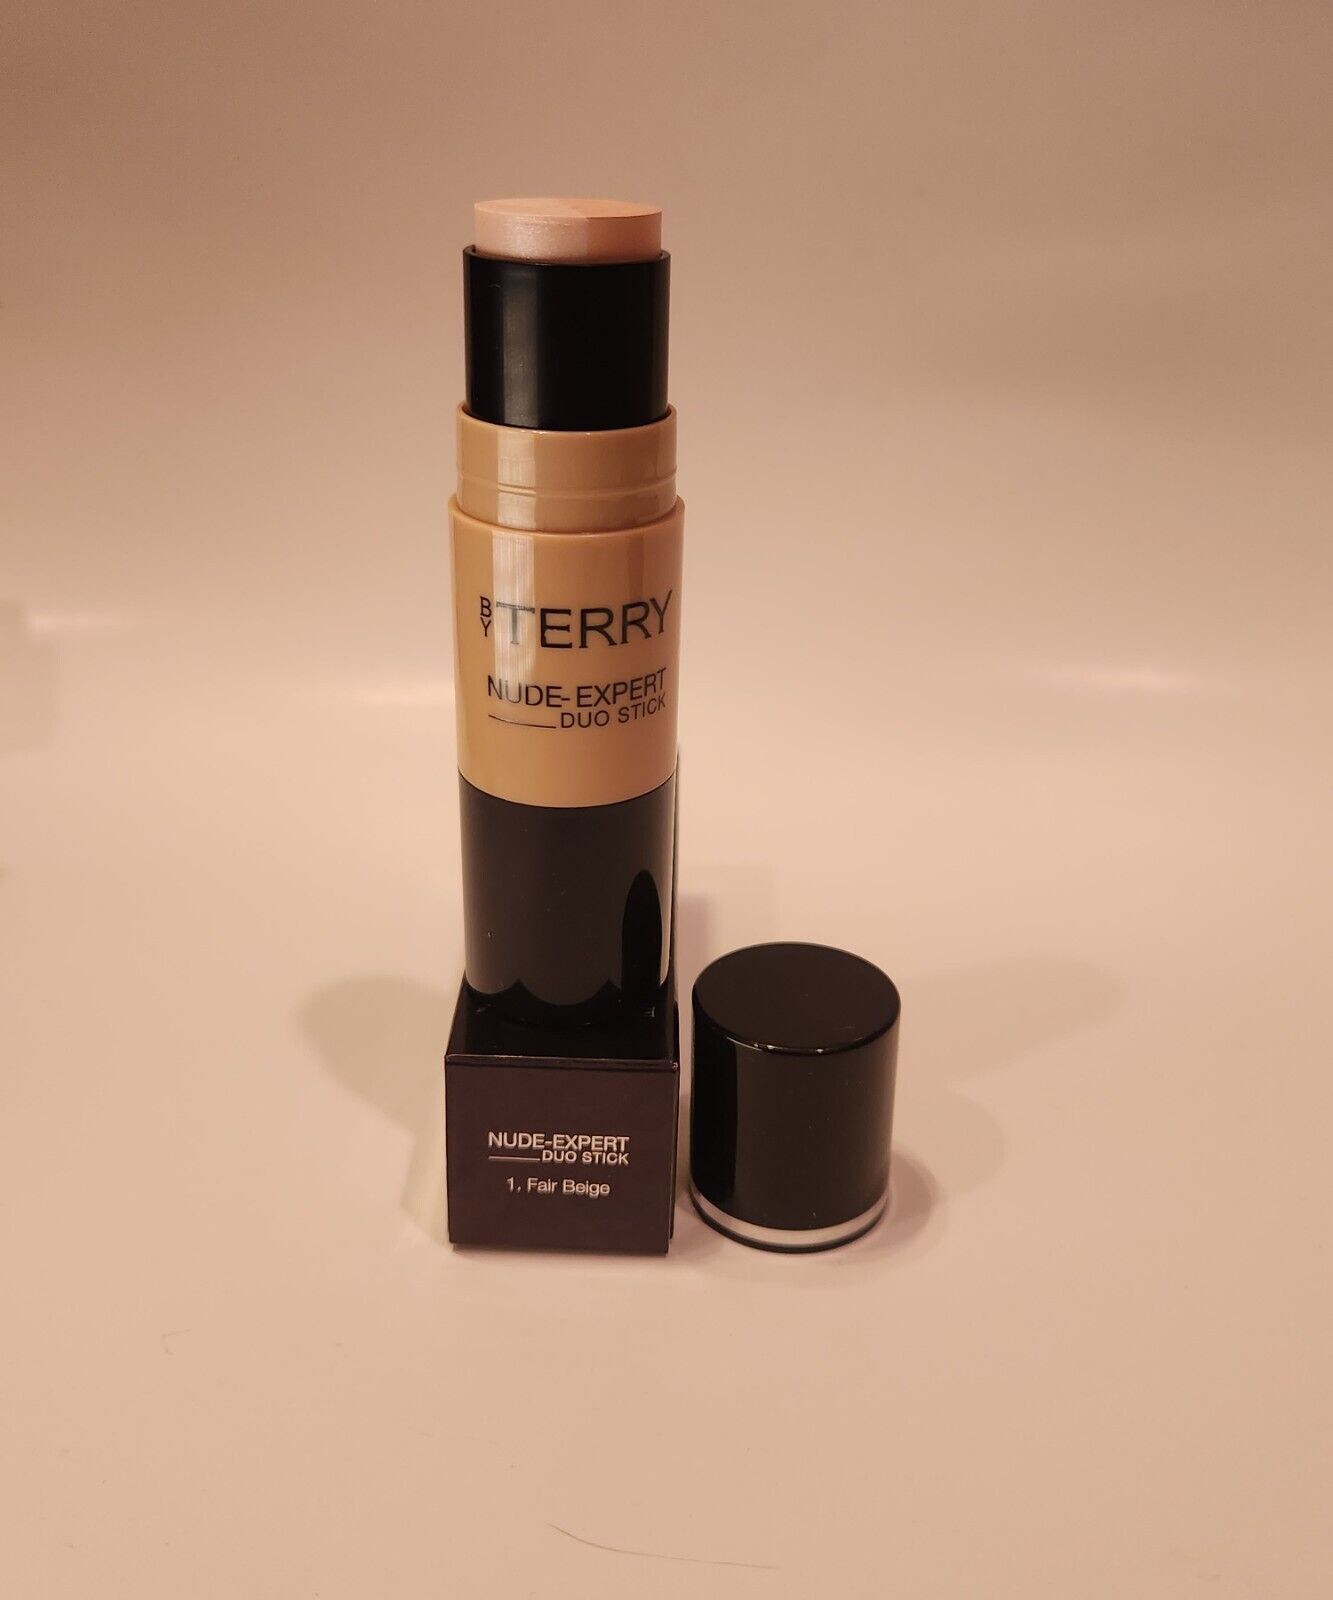 Primary image for By Terry Nude-Expert Duo Stick Foundation: 1.Fair Beige, 0.3oz